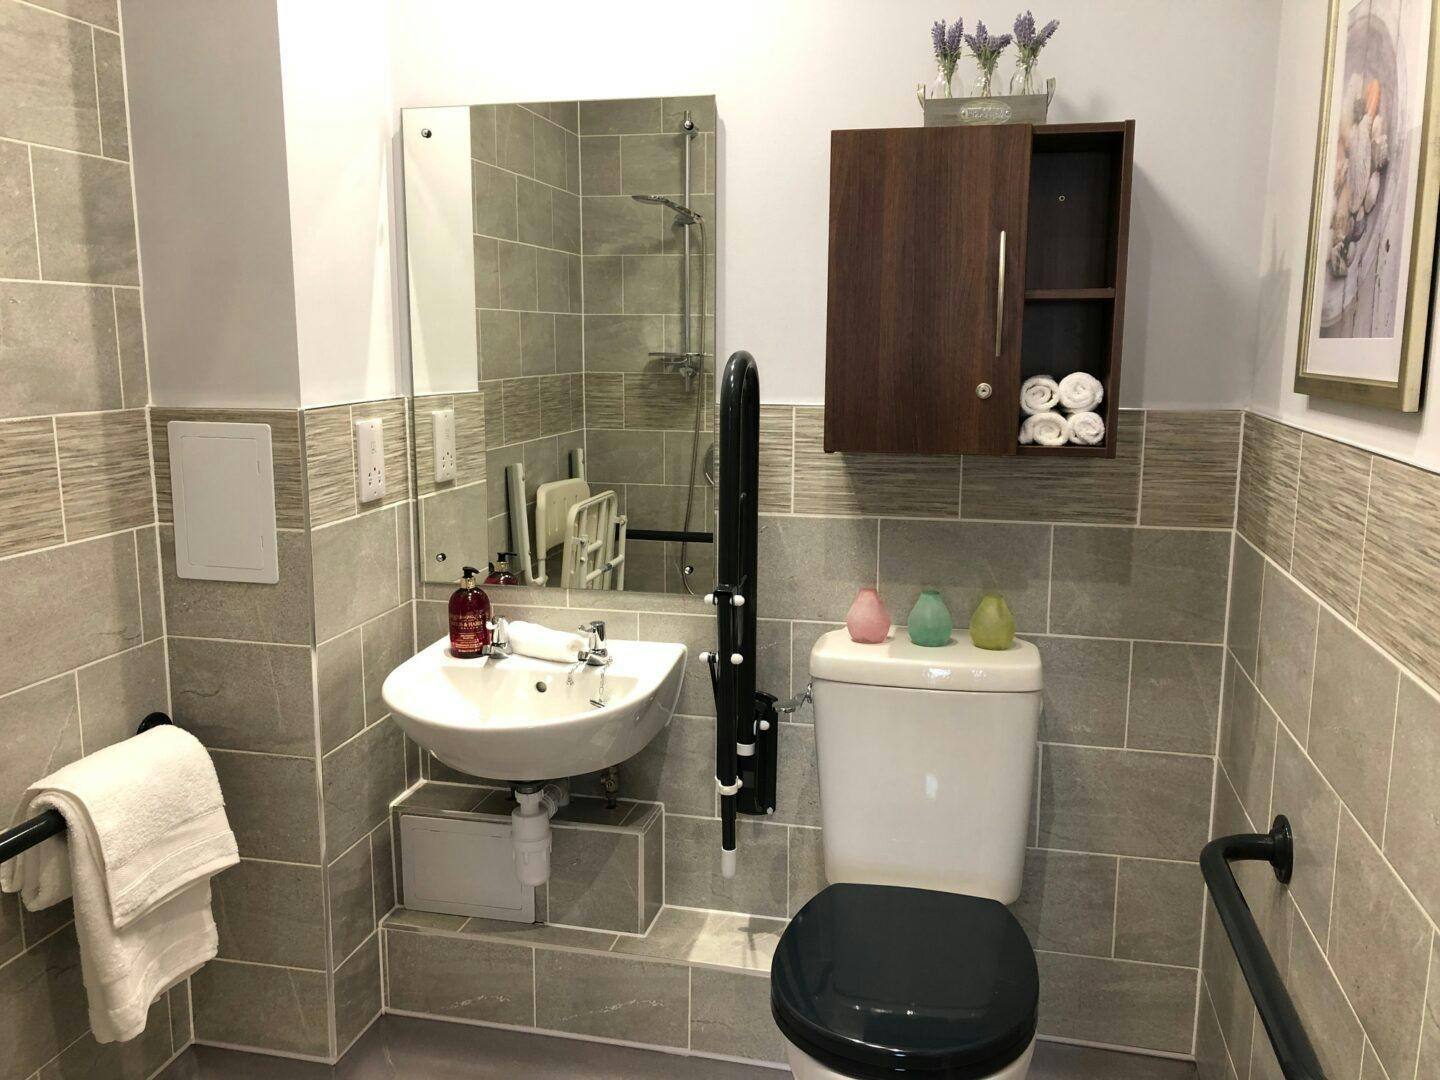 Bathroom at Bishop's Cleeve Care Home in Cheltenham, Gloucestershire